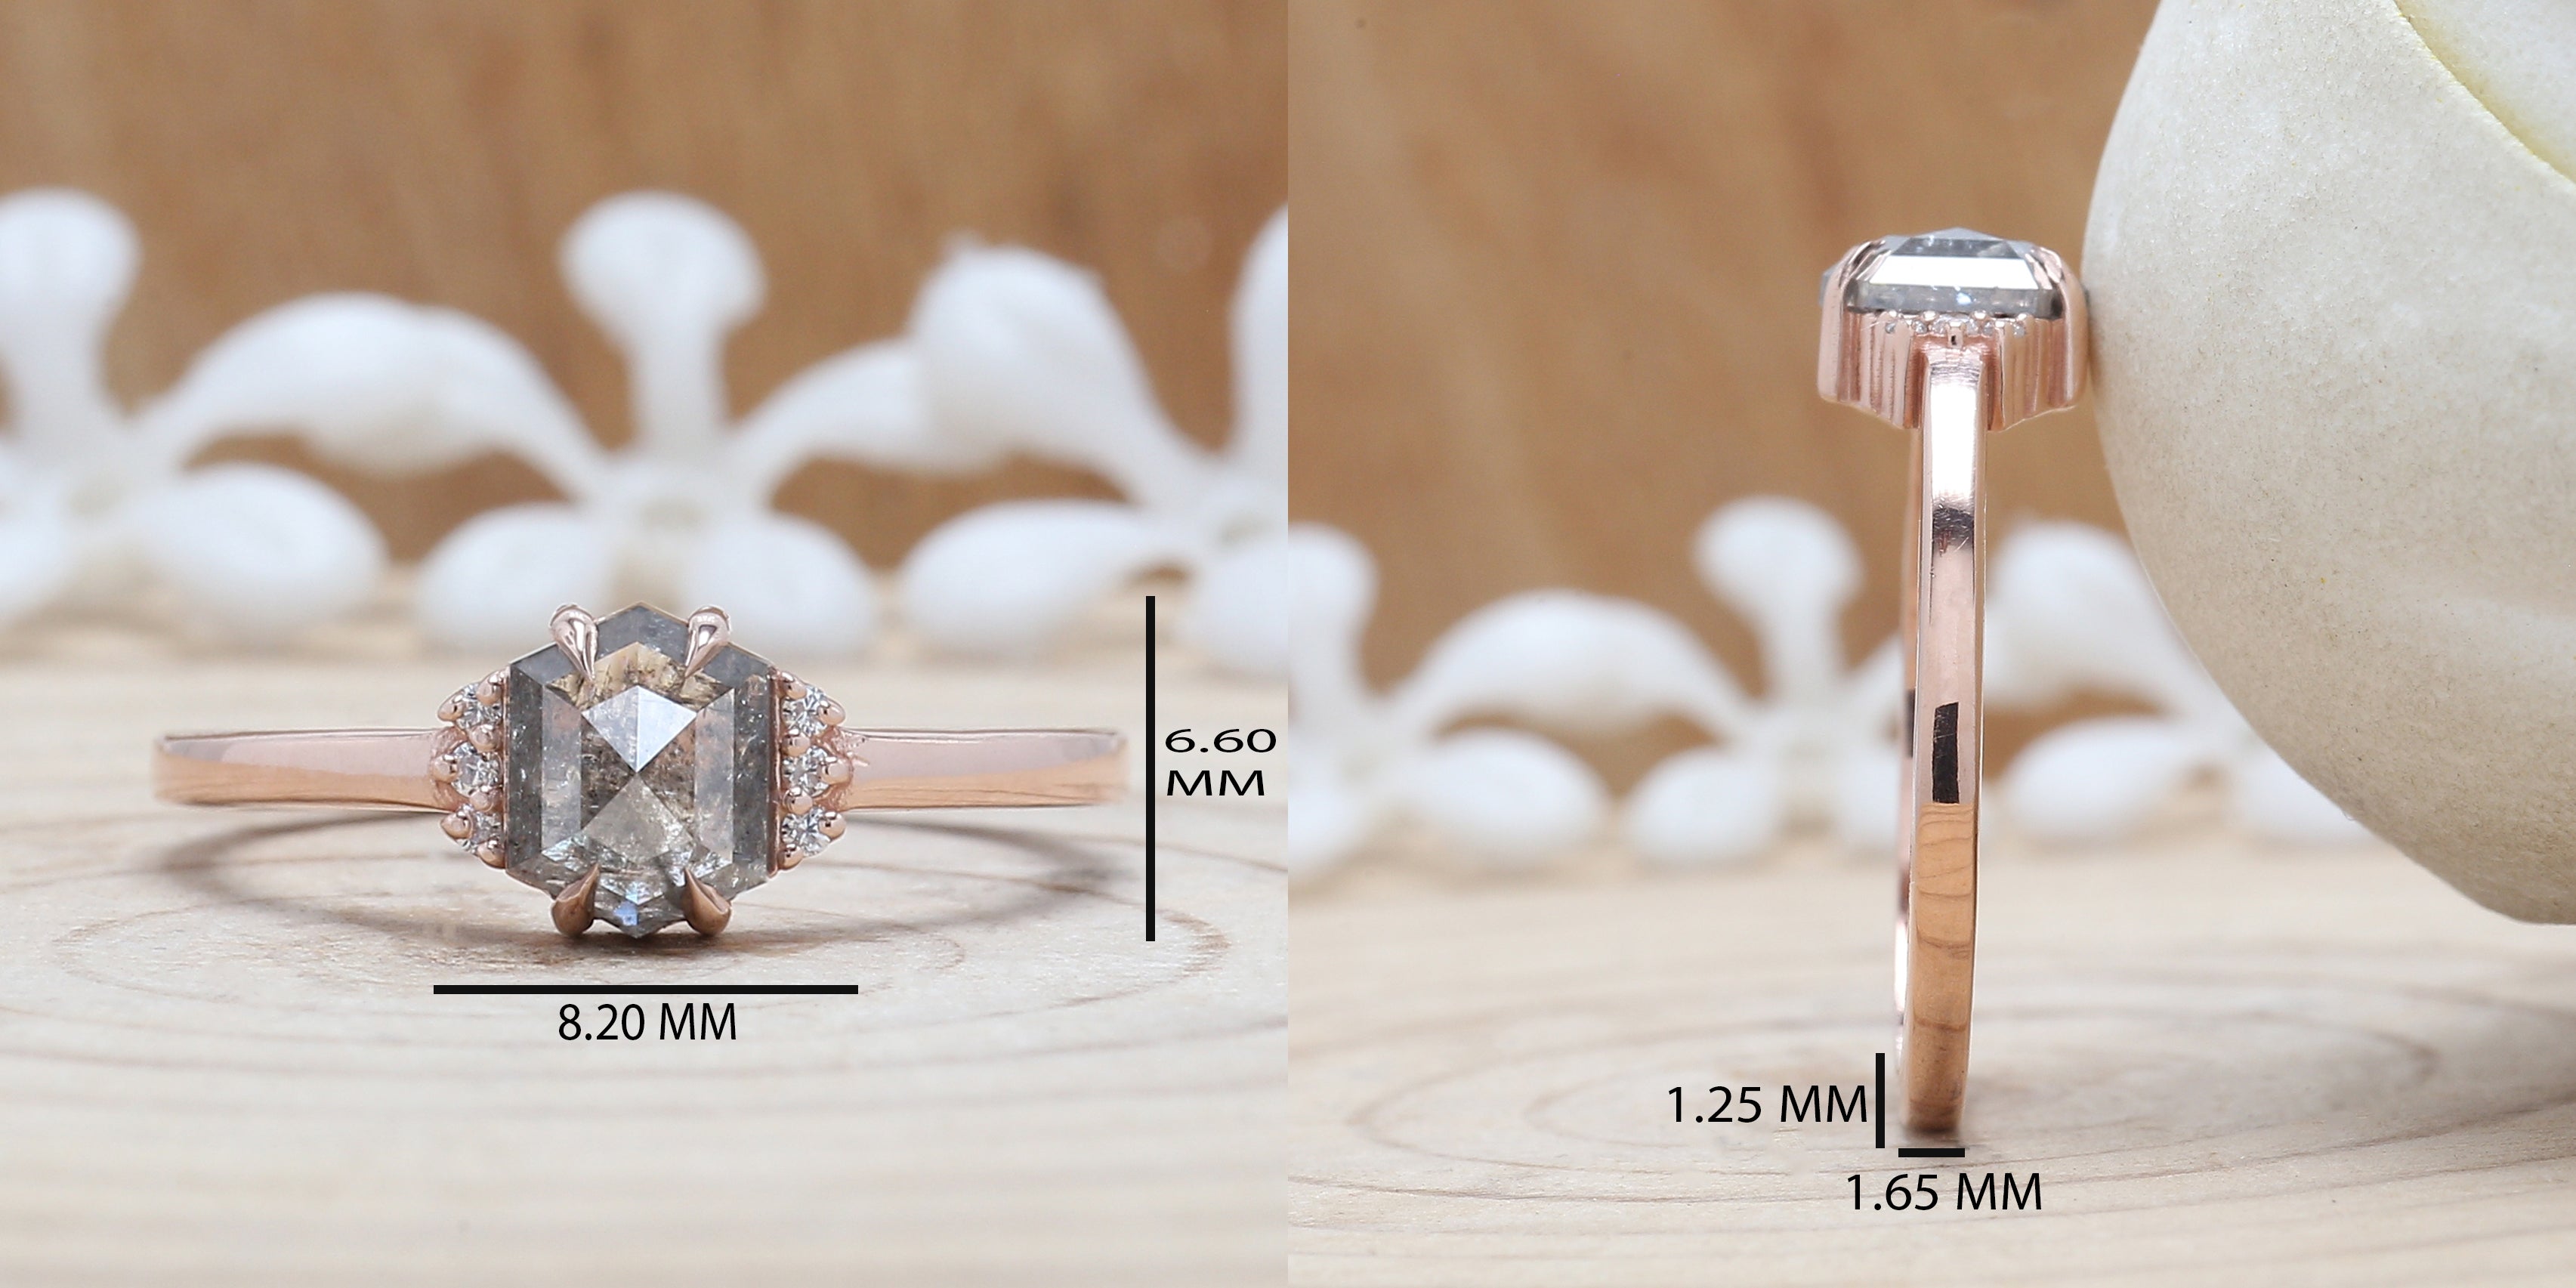 Hexagon Cut Salt And Pepper Diamond Ring 0.97 Ct 6.60 MM Hexagon Cut Diamond Ring 14K Rose Gold Silver Engagement Ring Gift For Her QN932